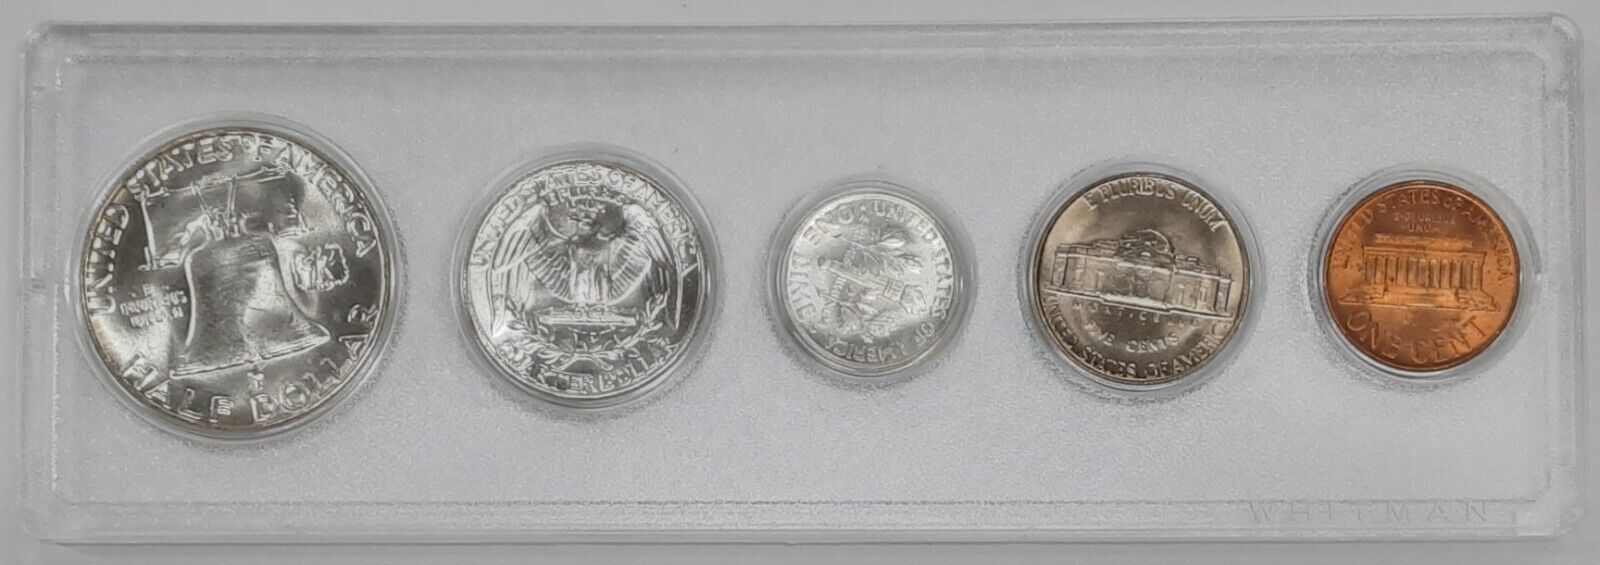 1961 US Uncirculated Year Set with Silver Half Quarter and Dime 5 Coins Total